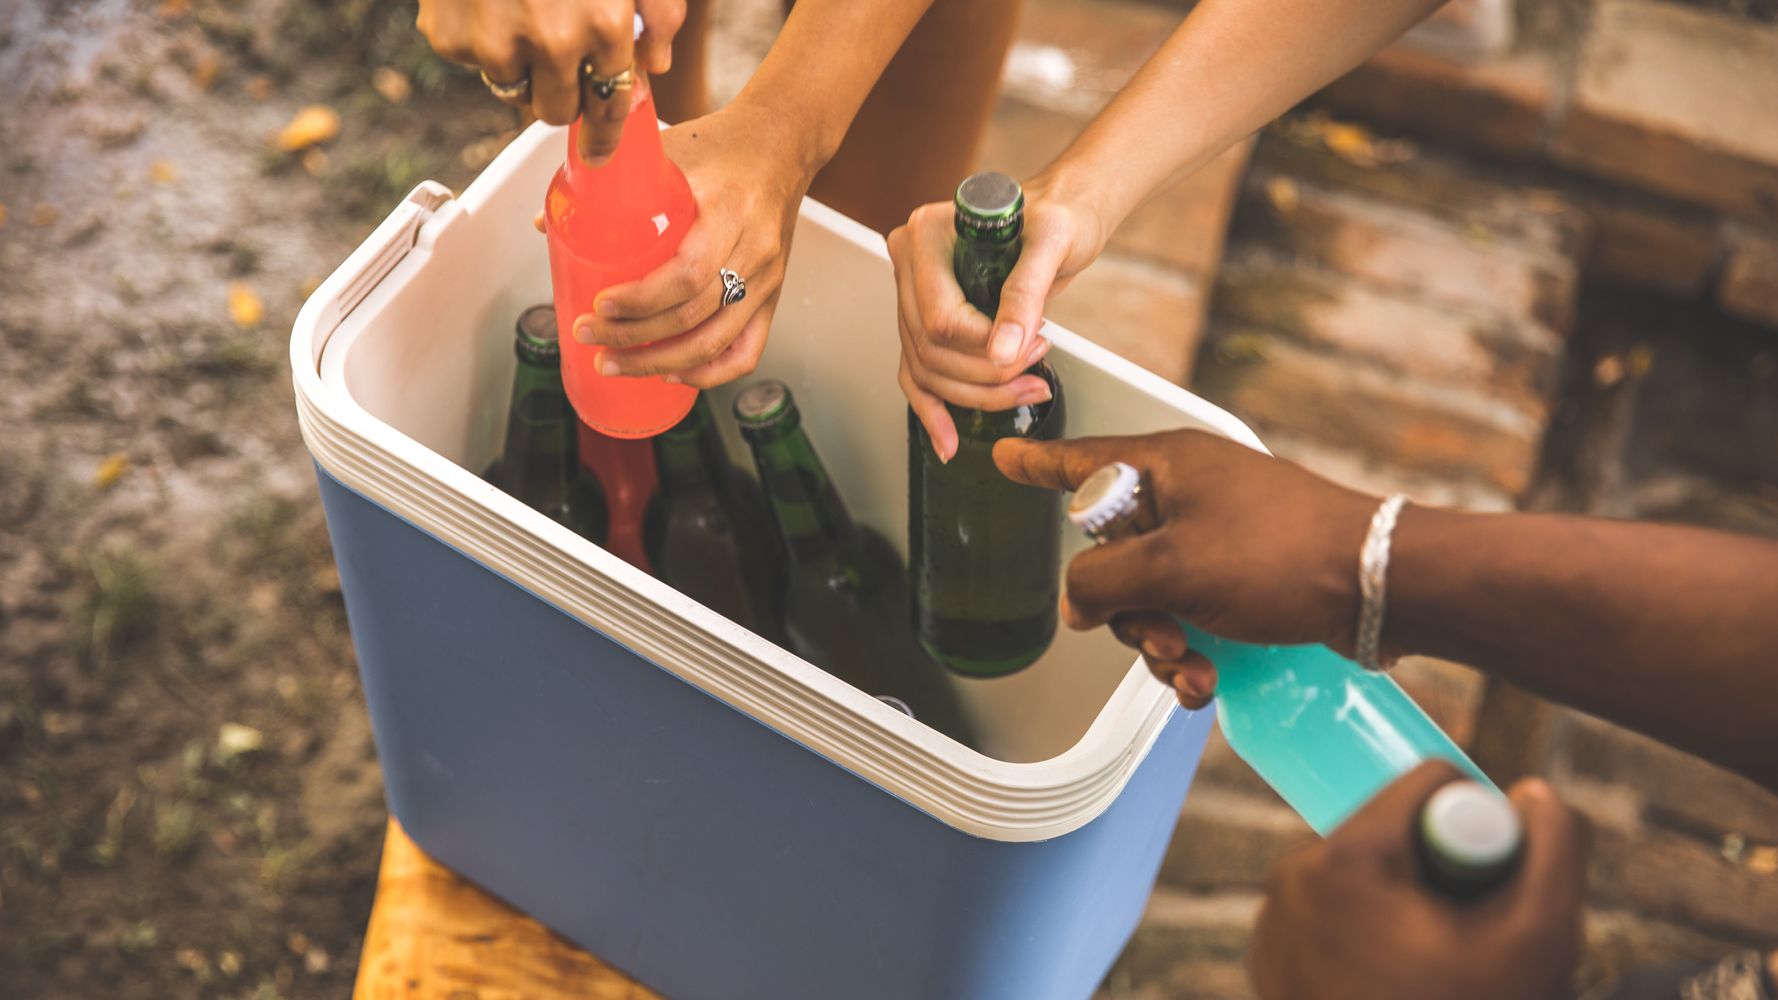 How To Pack A Cooler That'll Stay Ice Cold, According To Experts